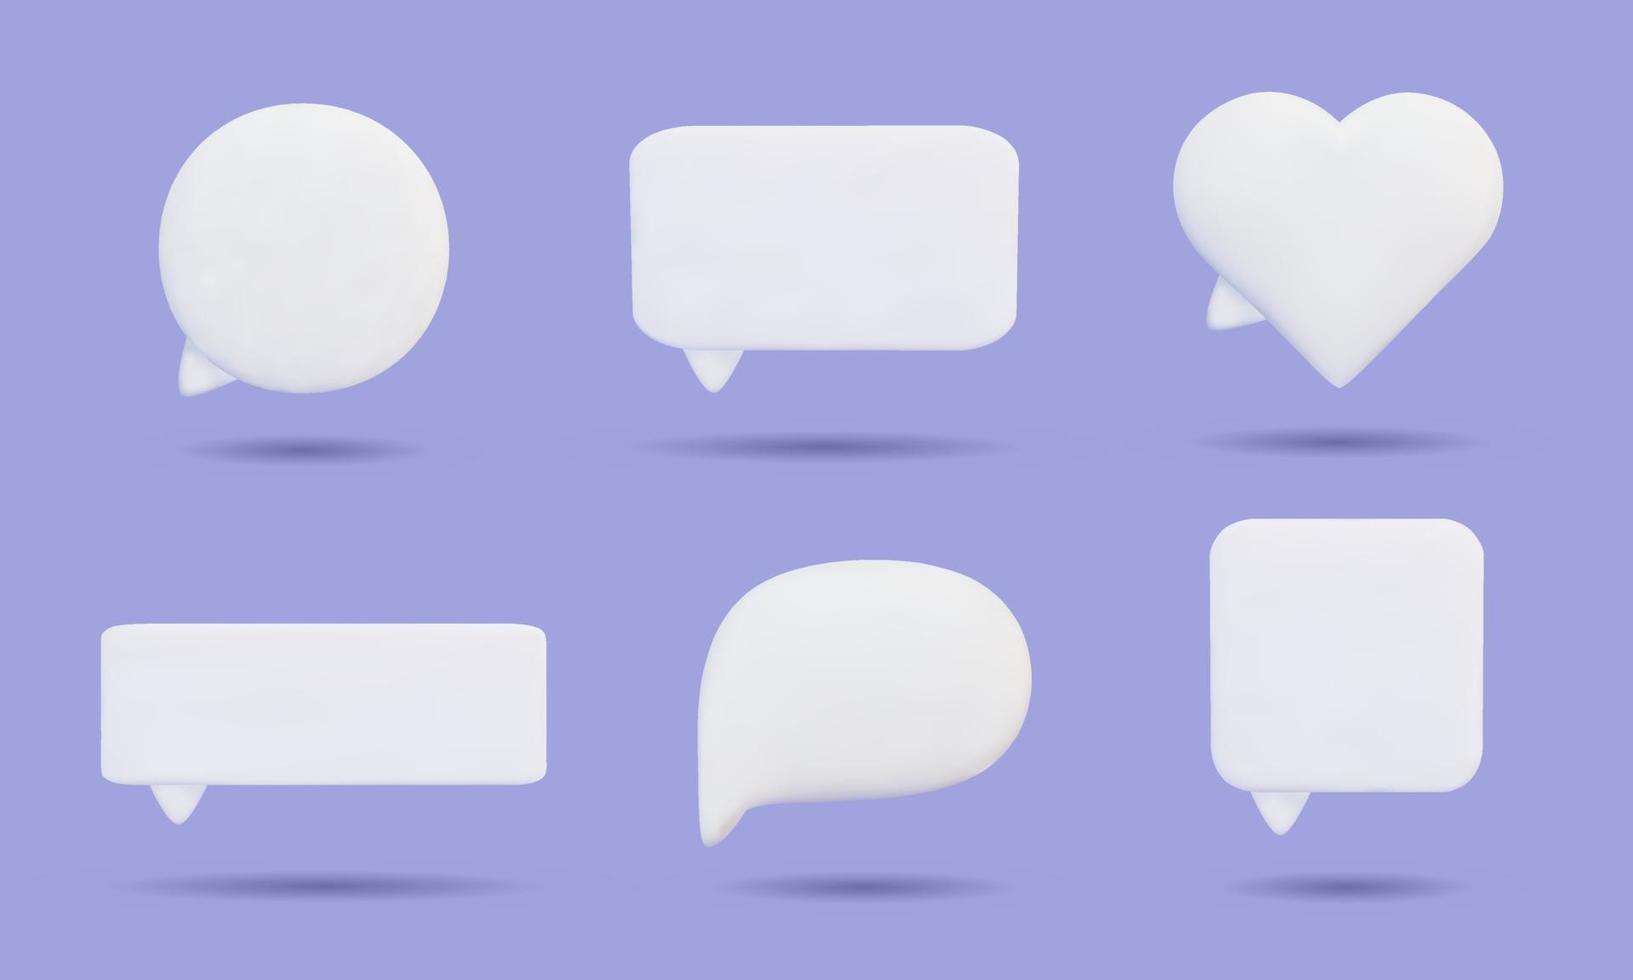 Blank white 3d speech bubbles icons set.  Cartoon message boxes of different shapes. Social networking, chatting. Realistic vector design element.